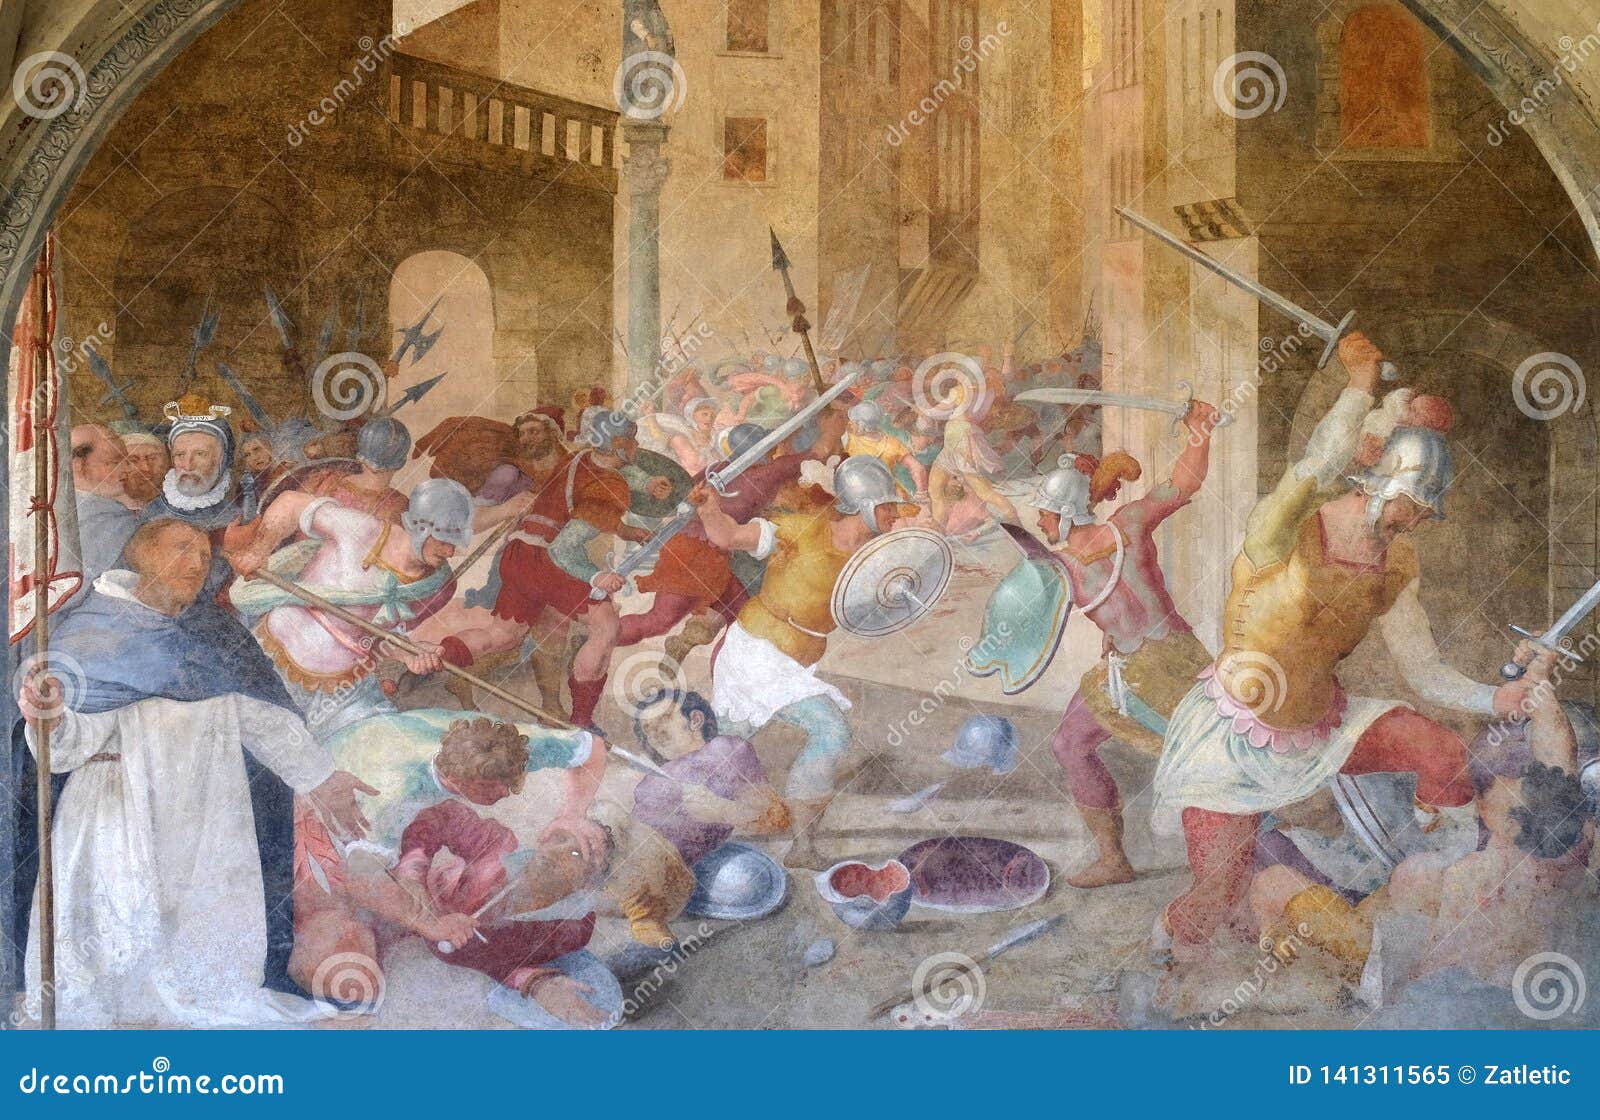 battle between catholics and heretics at the time of st. peter the martyr, fresco in santa maria novella church in florence